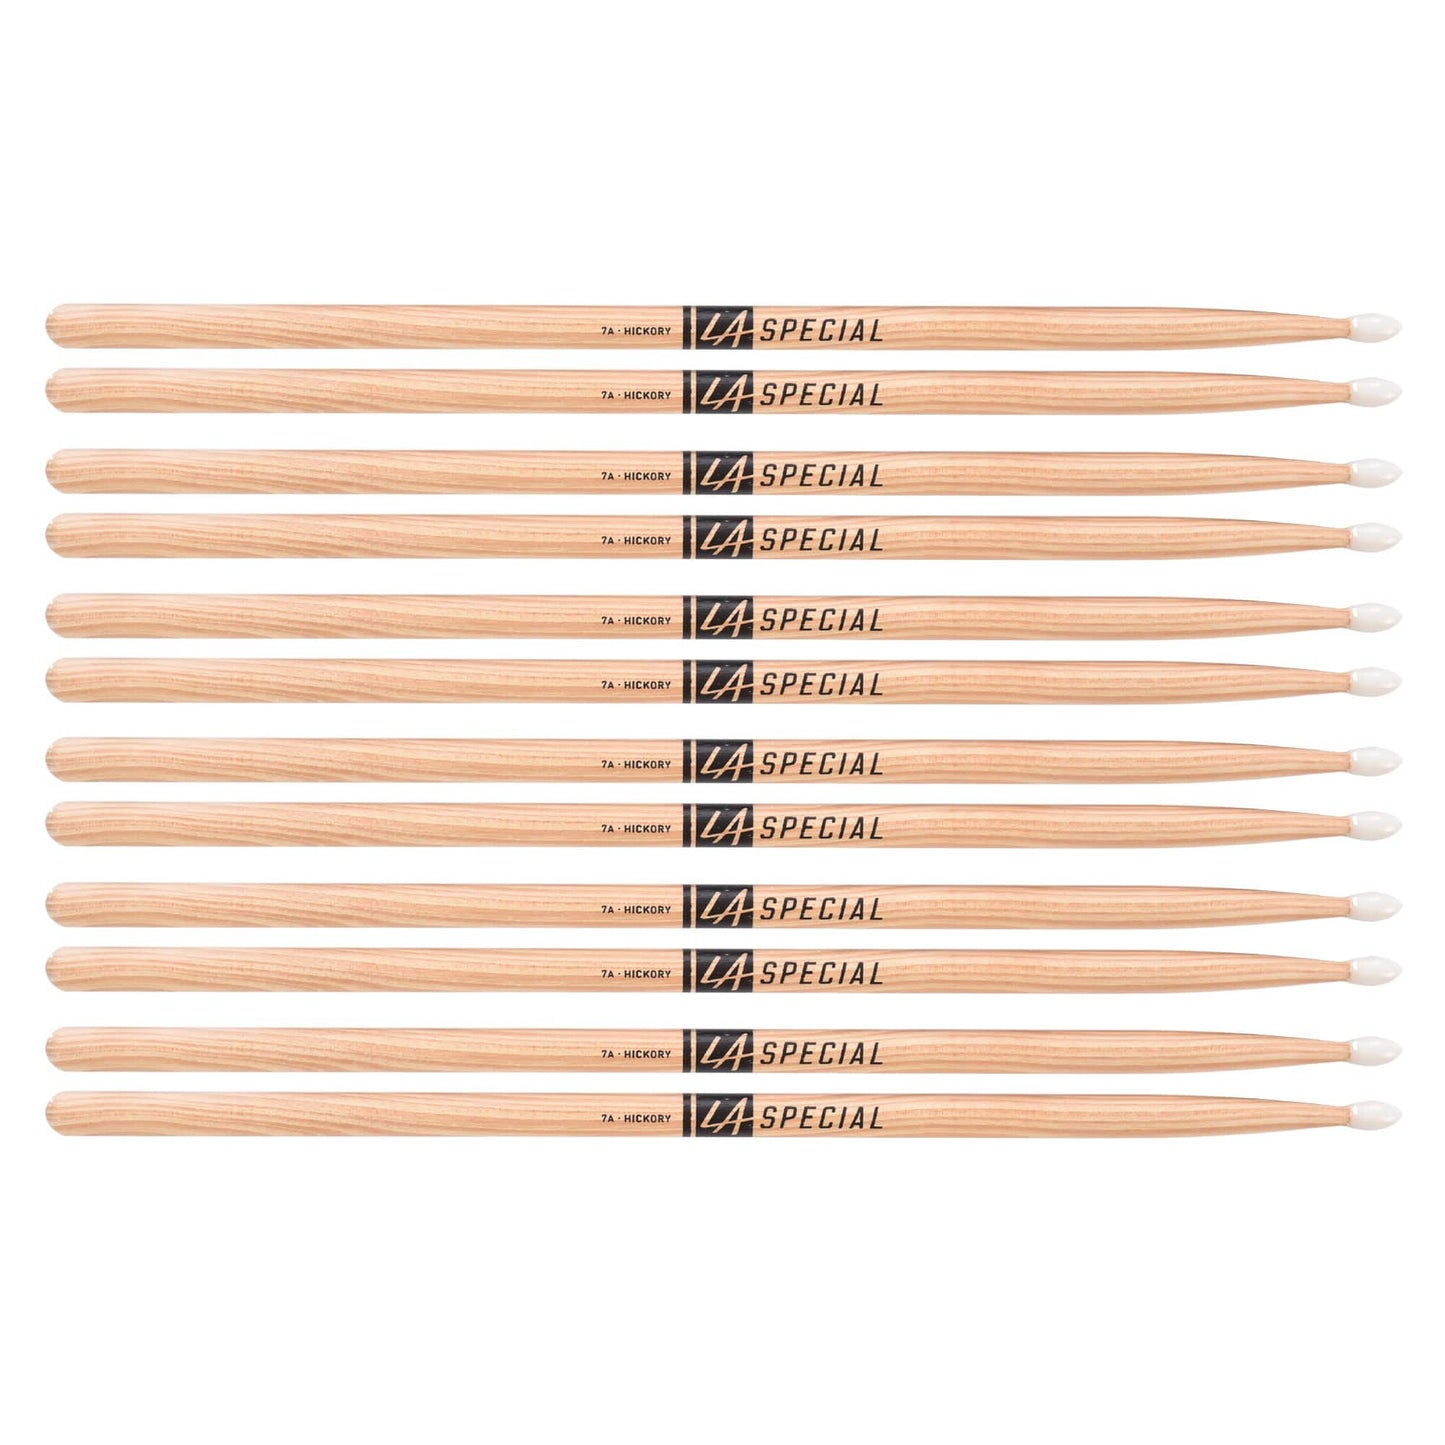 Promark LA Special 7A Nylon Tip Drum Sticks (6 Pair Bundle) Drums and Percussion / Parts and Accessories / Drum Sticks and Mallets